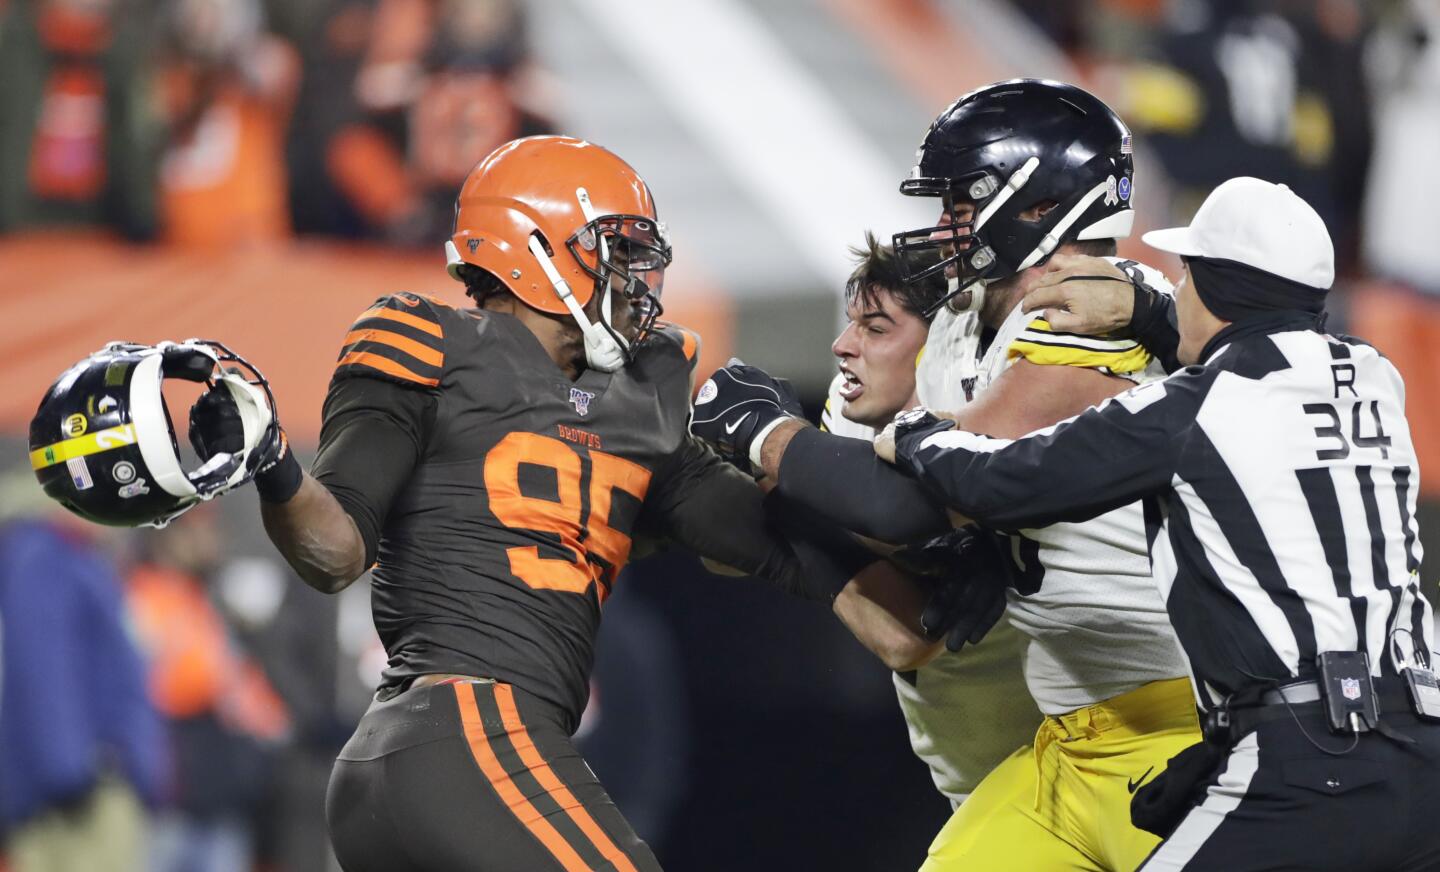 Cleveland Browns defensive end Myles Garrett, left, gets ready to hit Pittsburgh Steelers quarterback Mason Rudolph, second from left, with a helmet during the second half of an NFL football game Thursday, Nov. 14, 2019, in Cleveland. The Browns won 21-7. (AP Photo/Ron Schwane)